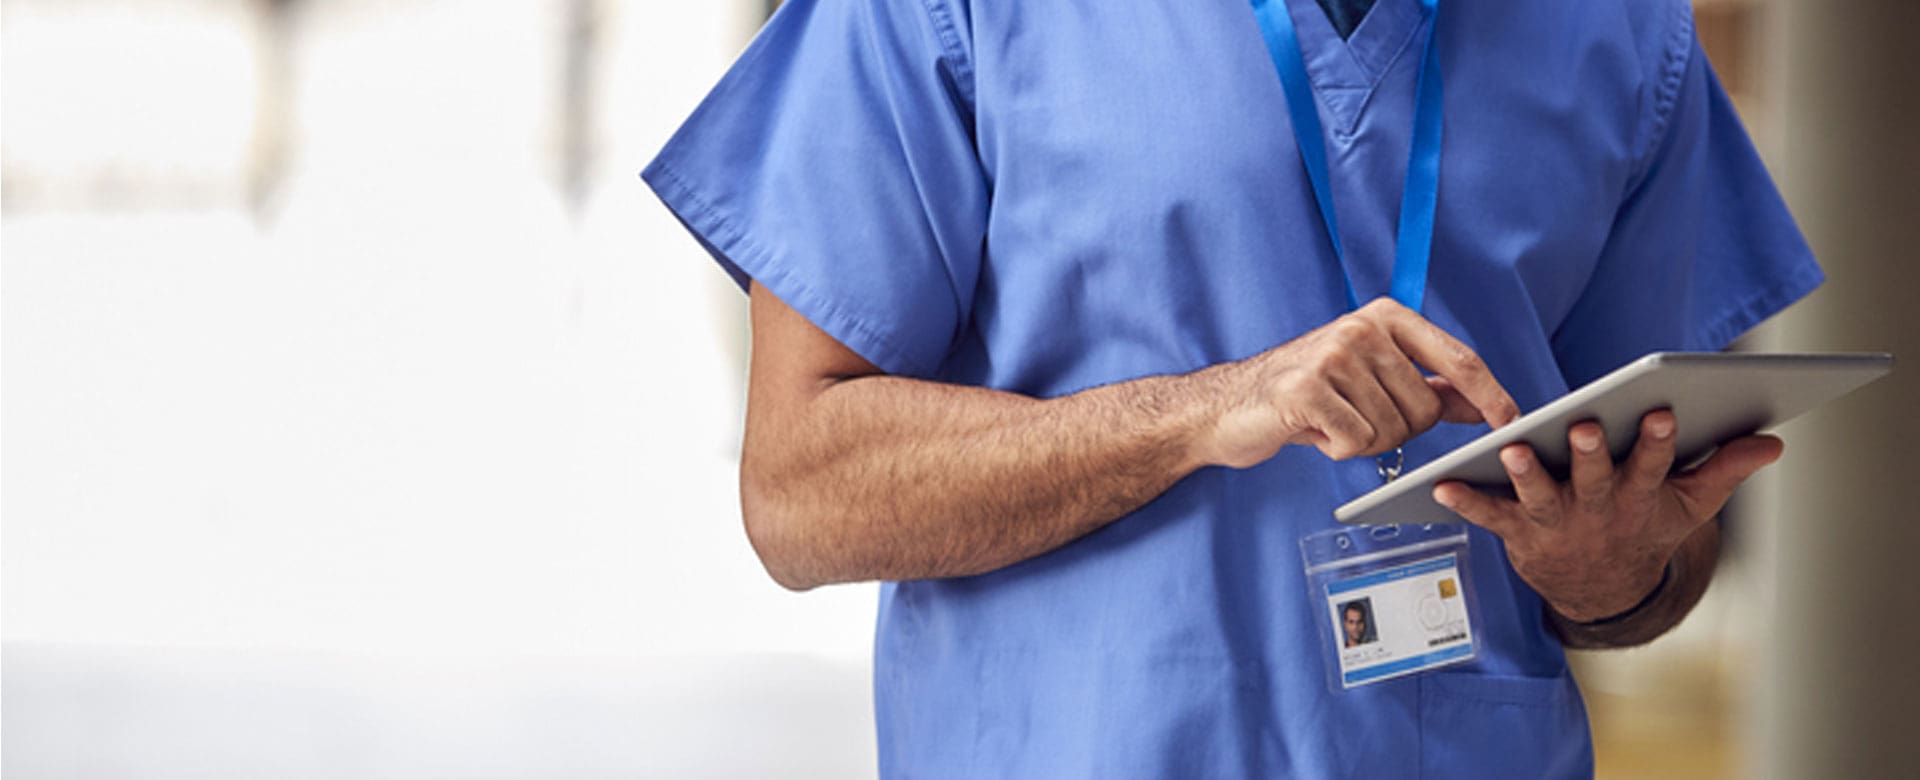 close up of male doctor wearing short sleeved blue gown using an ipad in his hands